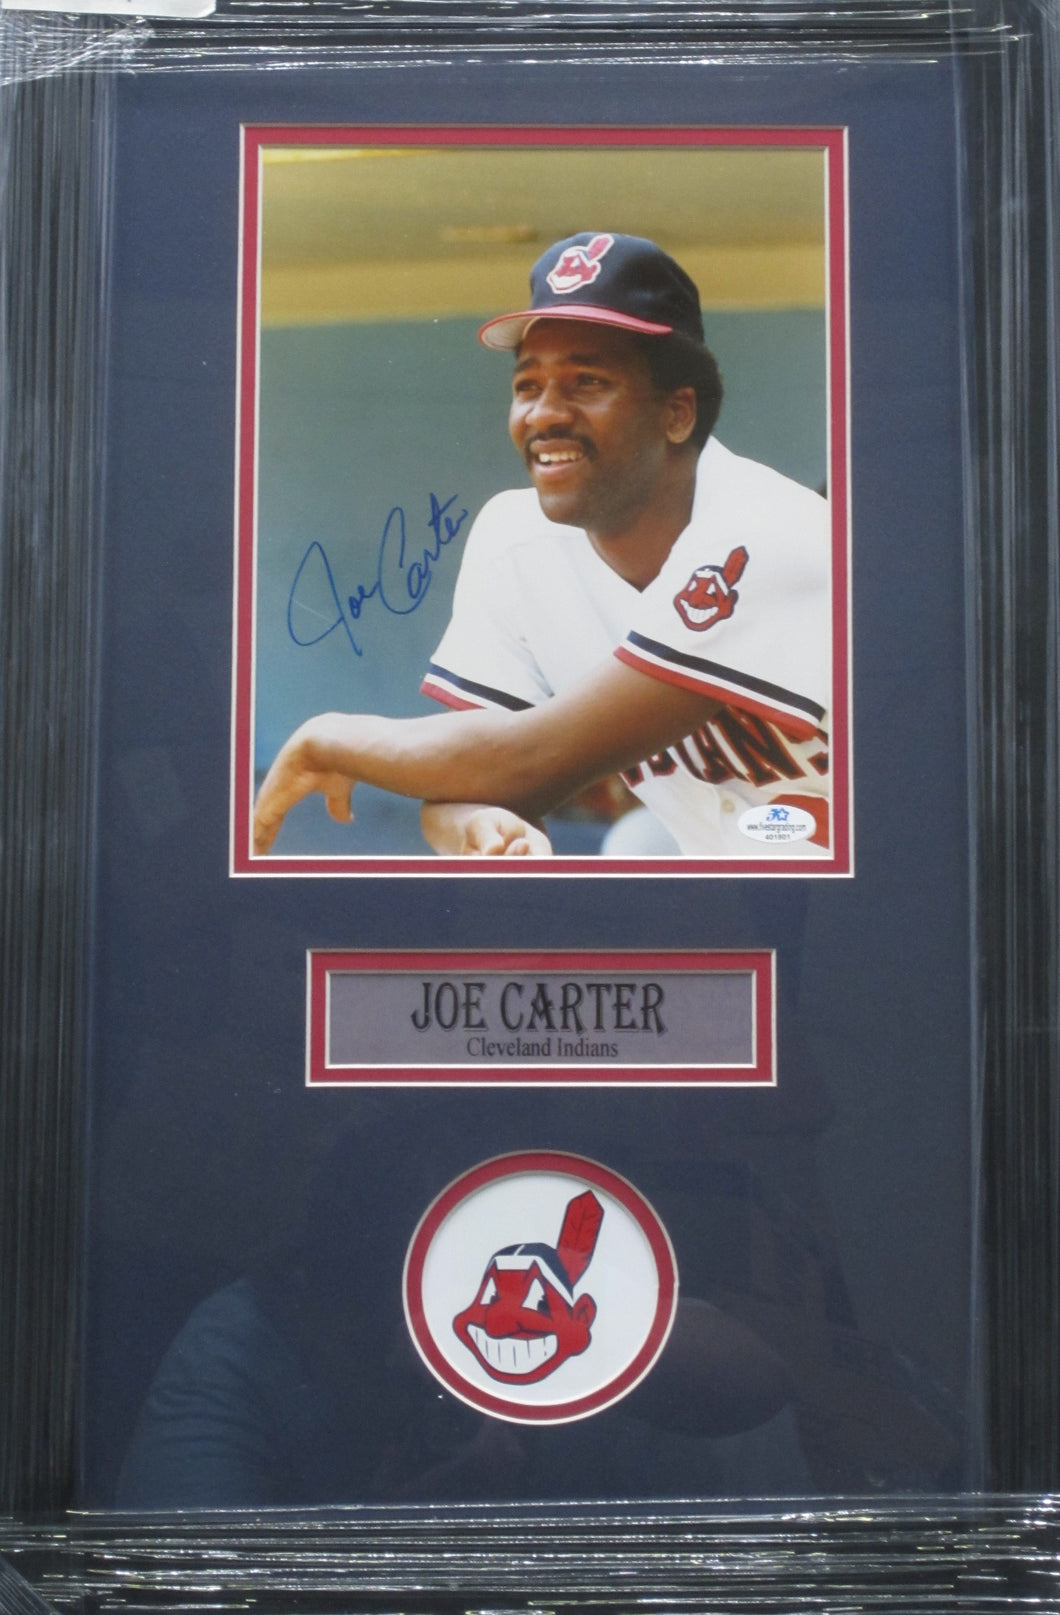 Cleveland Indians Joe Carter Signed 8x10 Photo Framed & Matted with COA